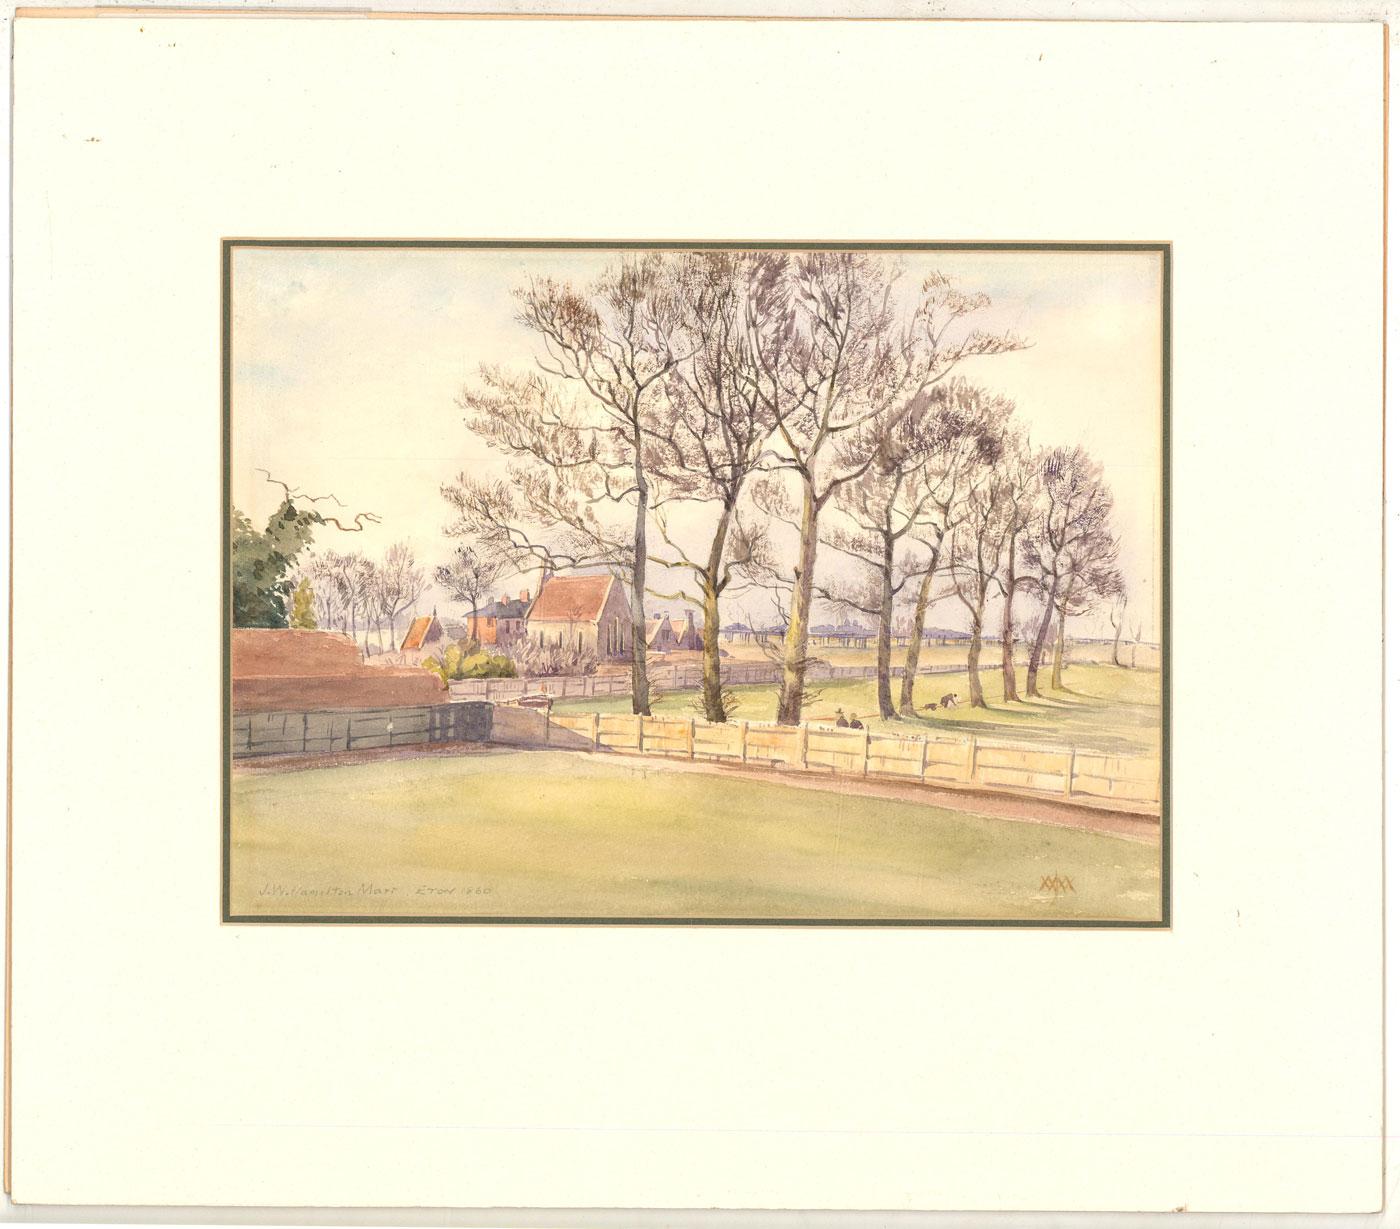 A fine view of Eton by the British artist J.W. Hamilton Marr. Although dated 1860 to the lower left, we think it more likely that the study was copied from an early photograph on Eton. Excellently presented in a double card mount. On watercolour